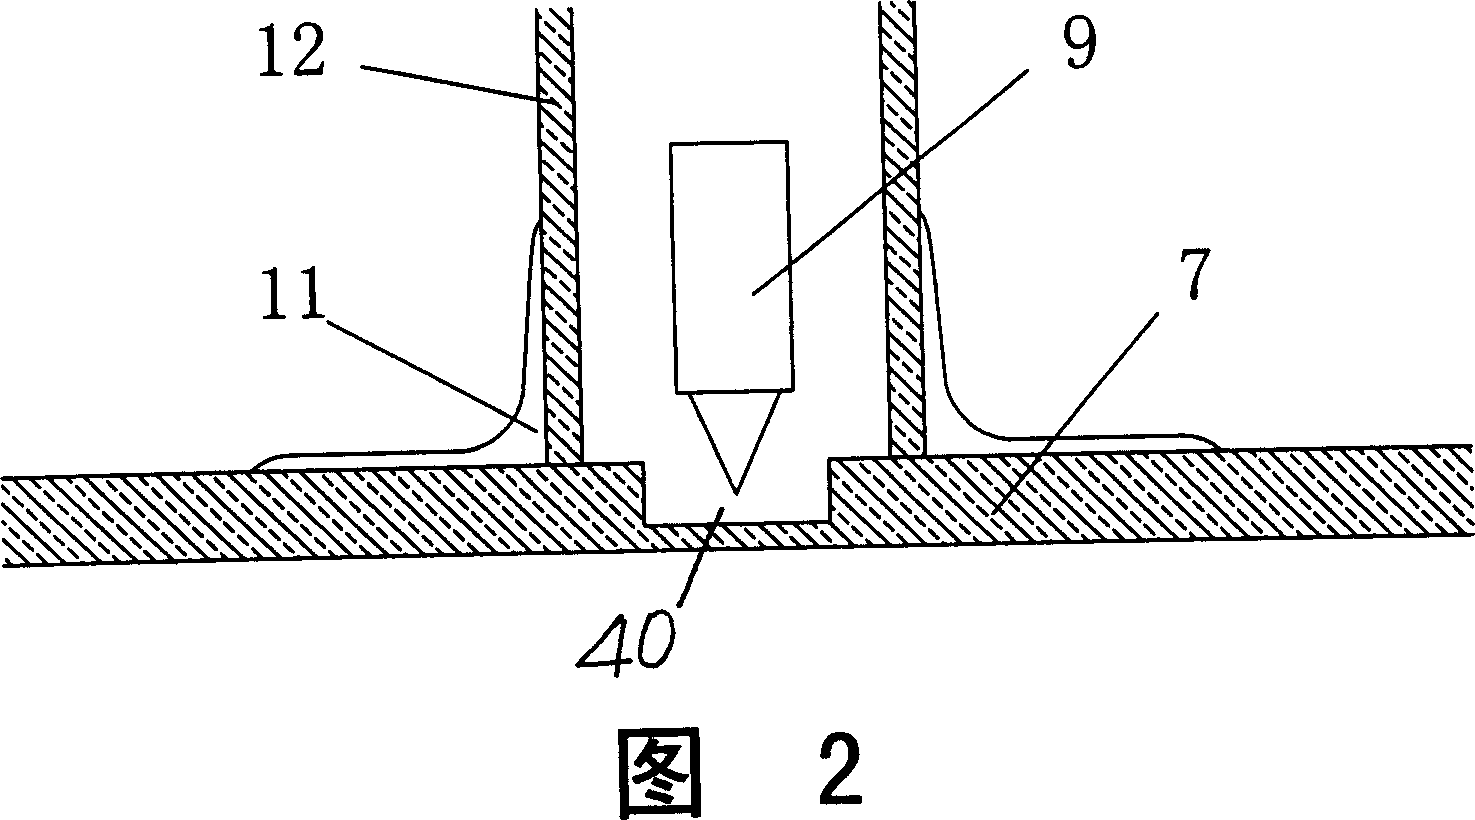 Testing device for barium film air-breathing capability of getter in kinescope